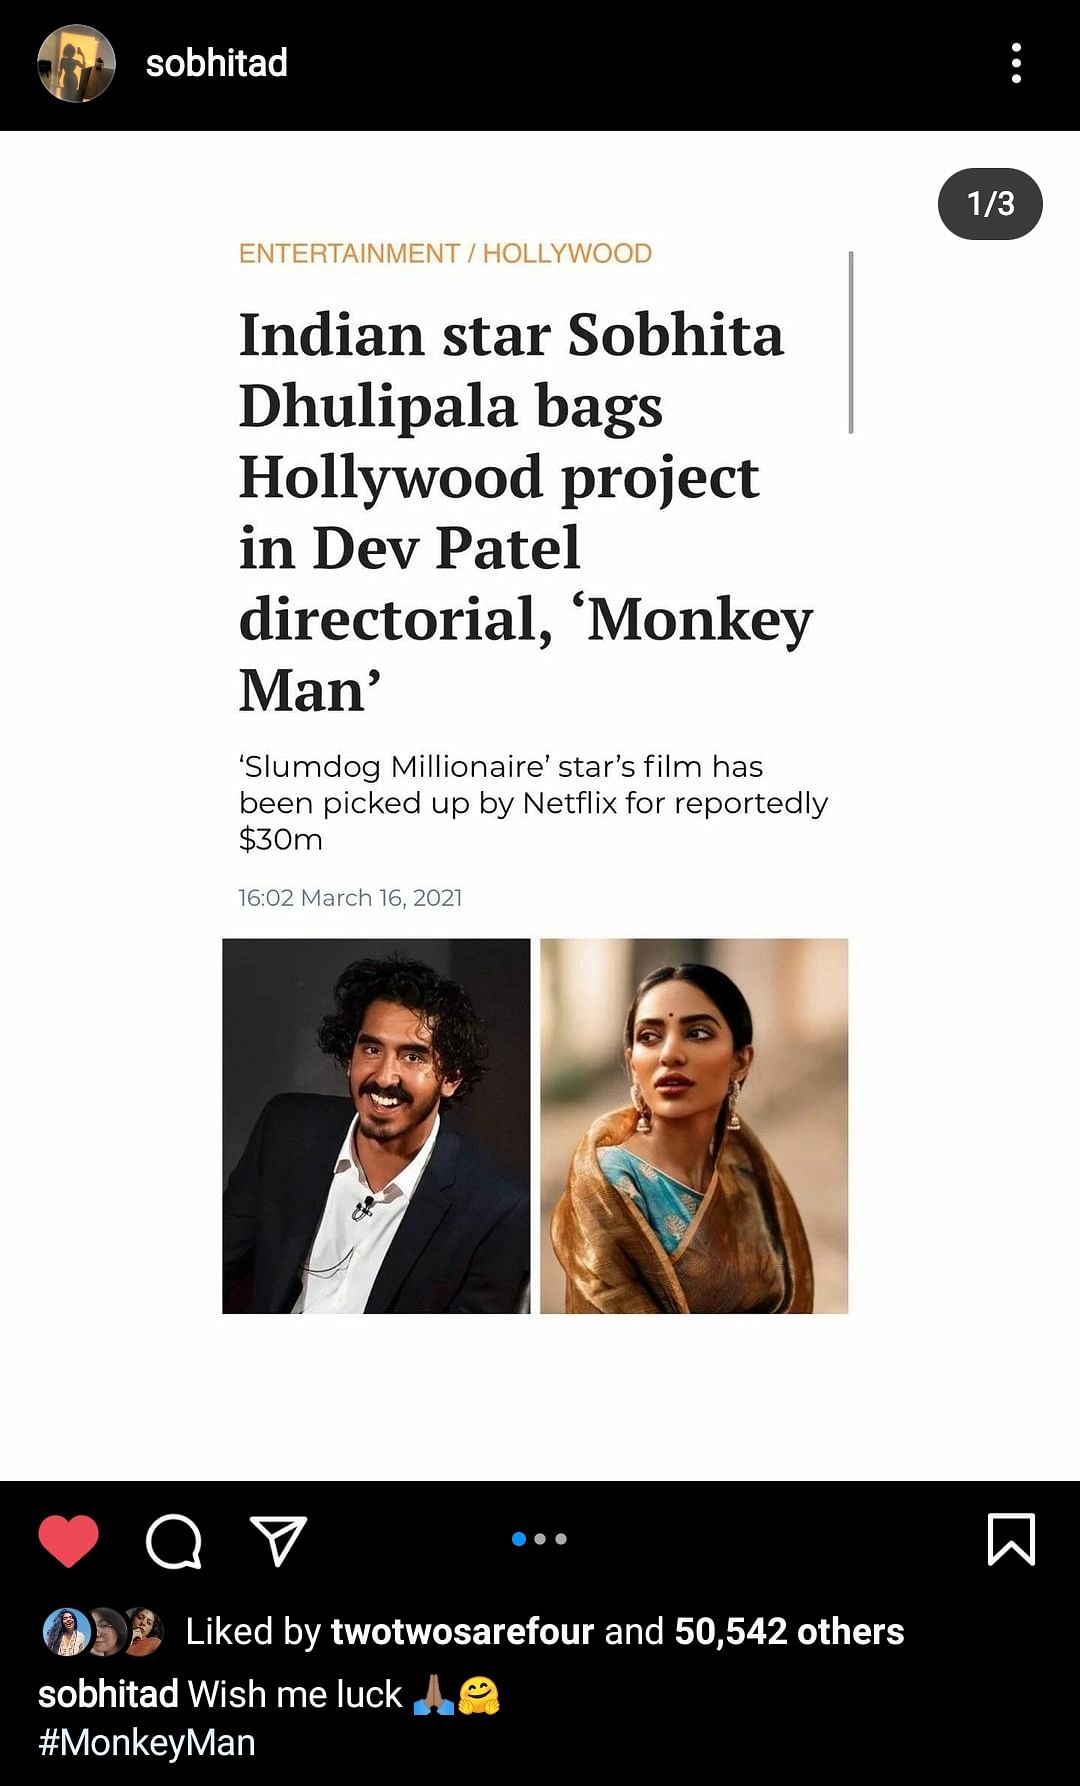 ‘Monkey Man’ is actor Dev Patel’s directorial debut and stars him as the lead